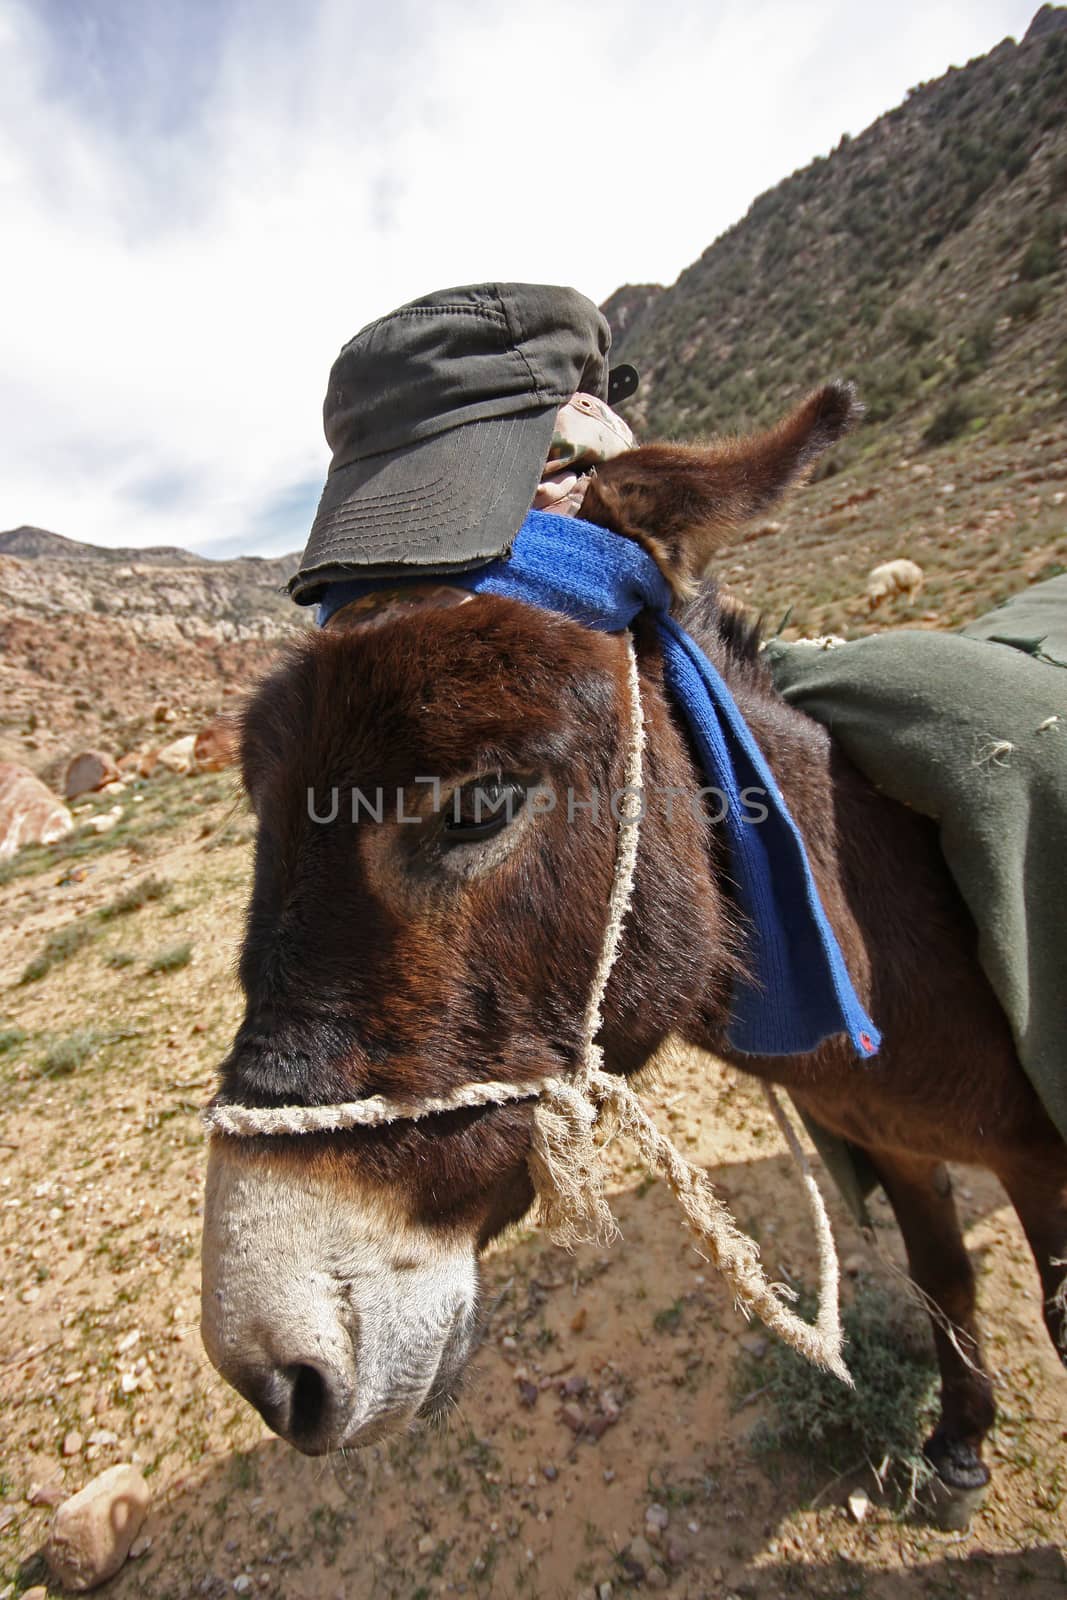 Donkey with scarf and a hat